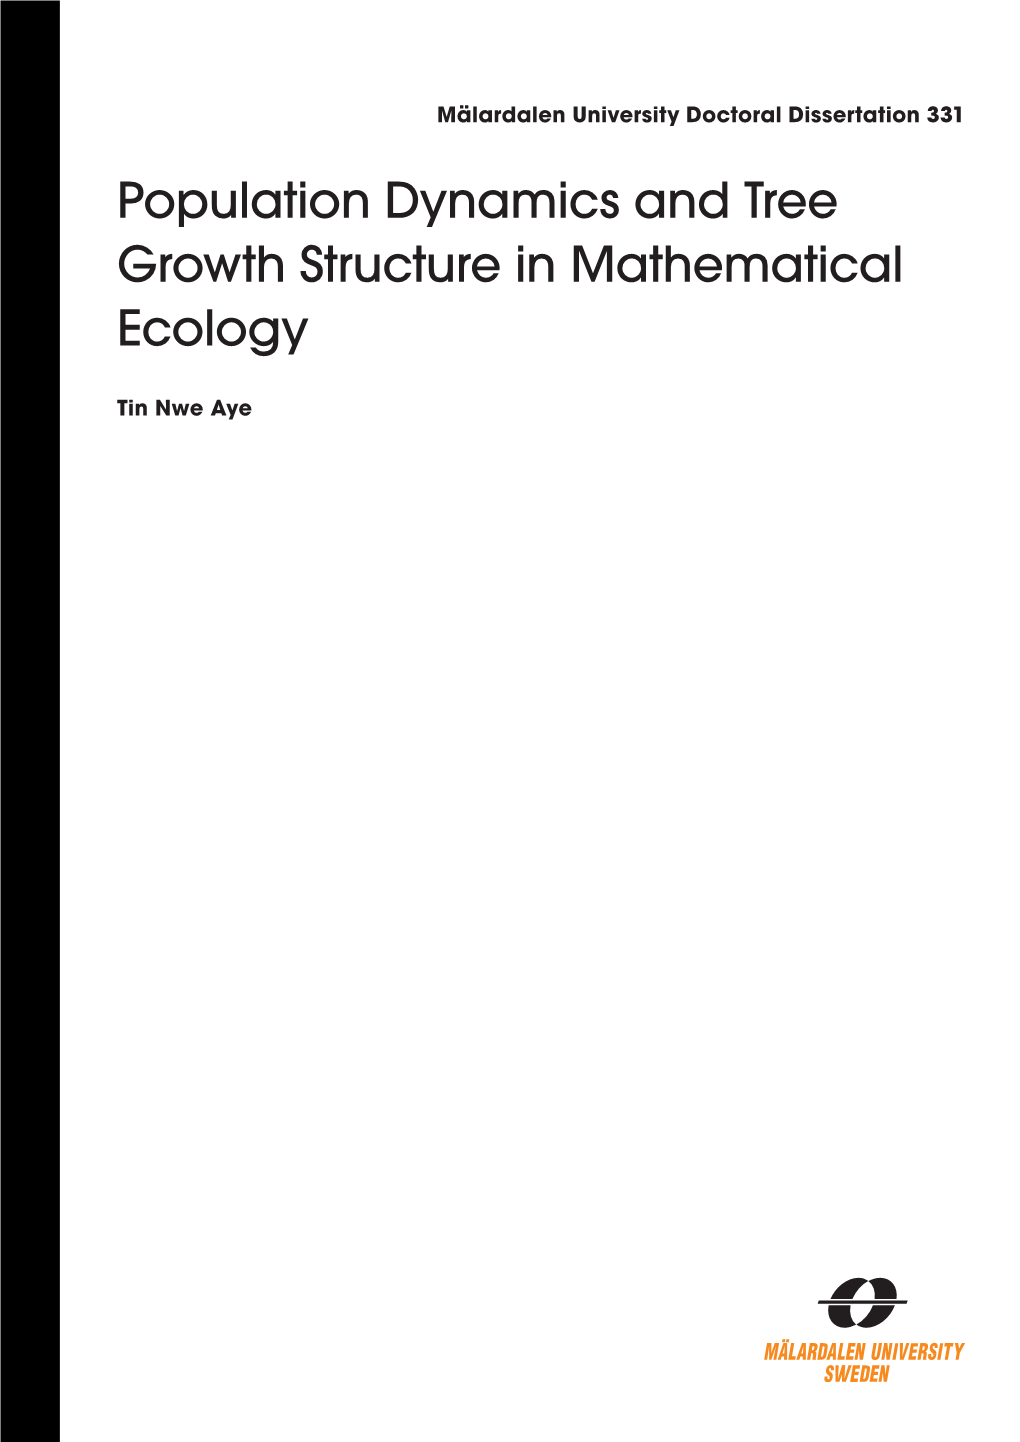 Population Dynamics and Tree Growth Structure in Mathematical Ecology 2021 Isbn 978-91-7485-498-5 Isbn Issn 1651-4238 P.O